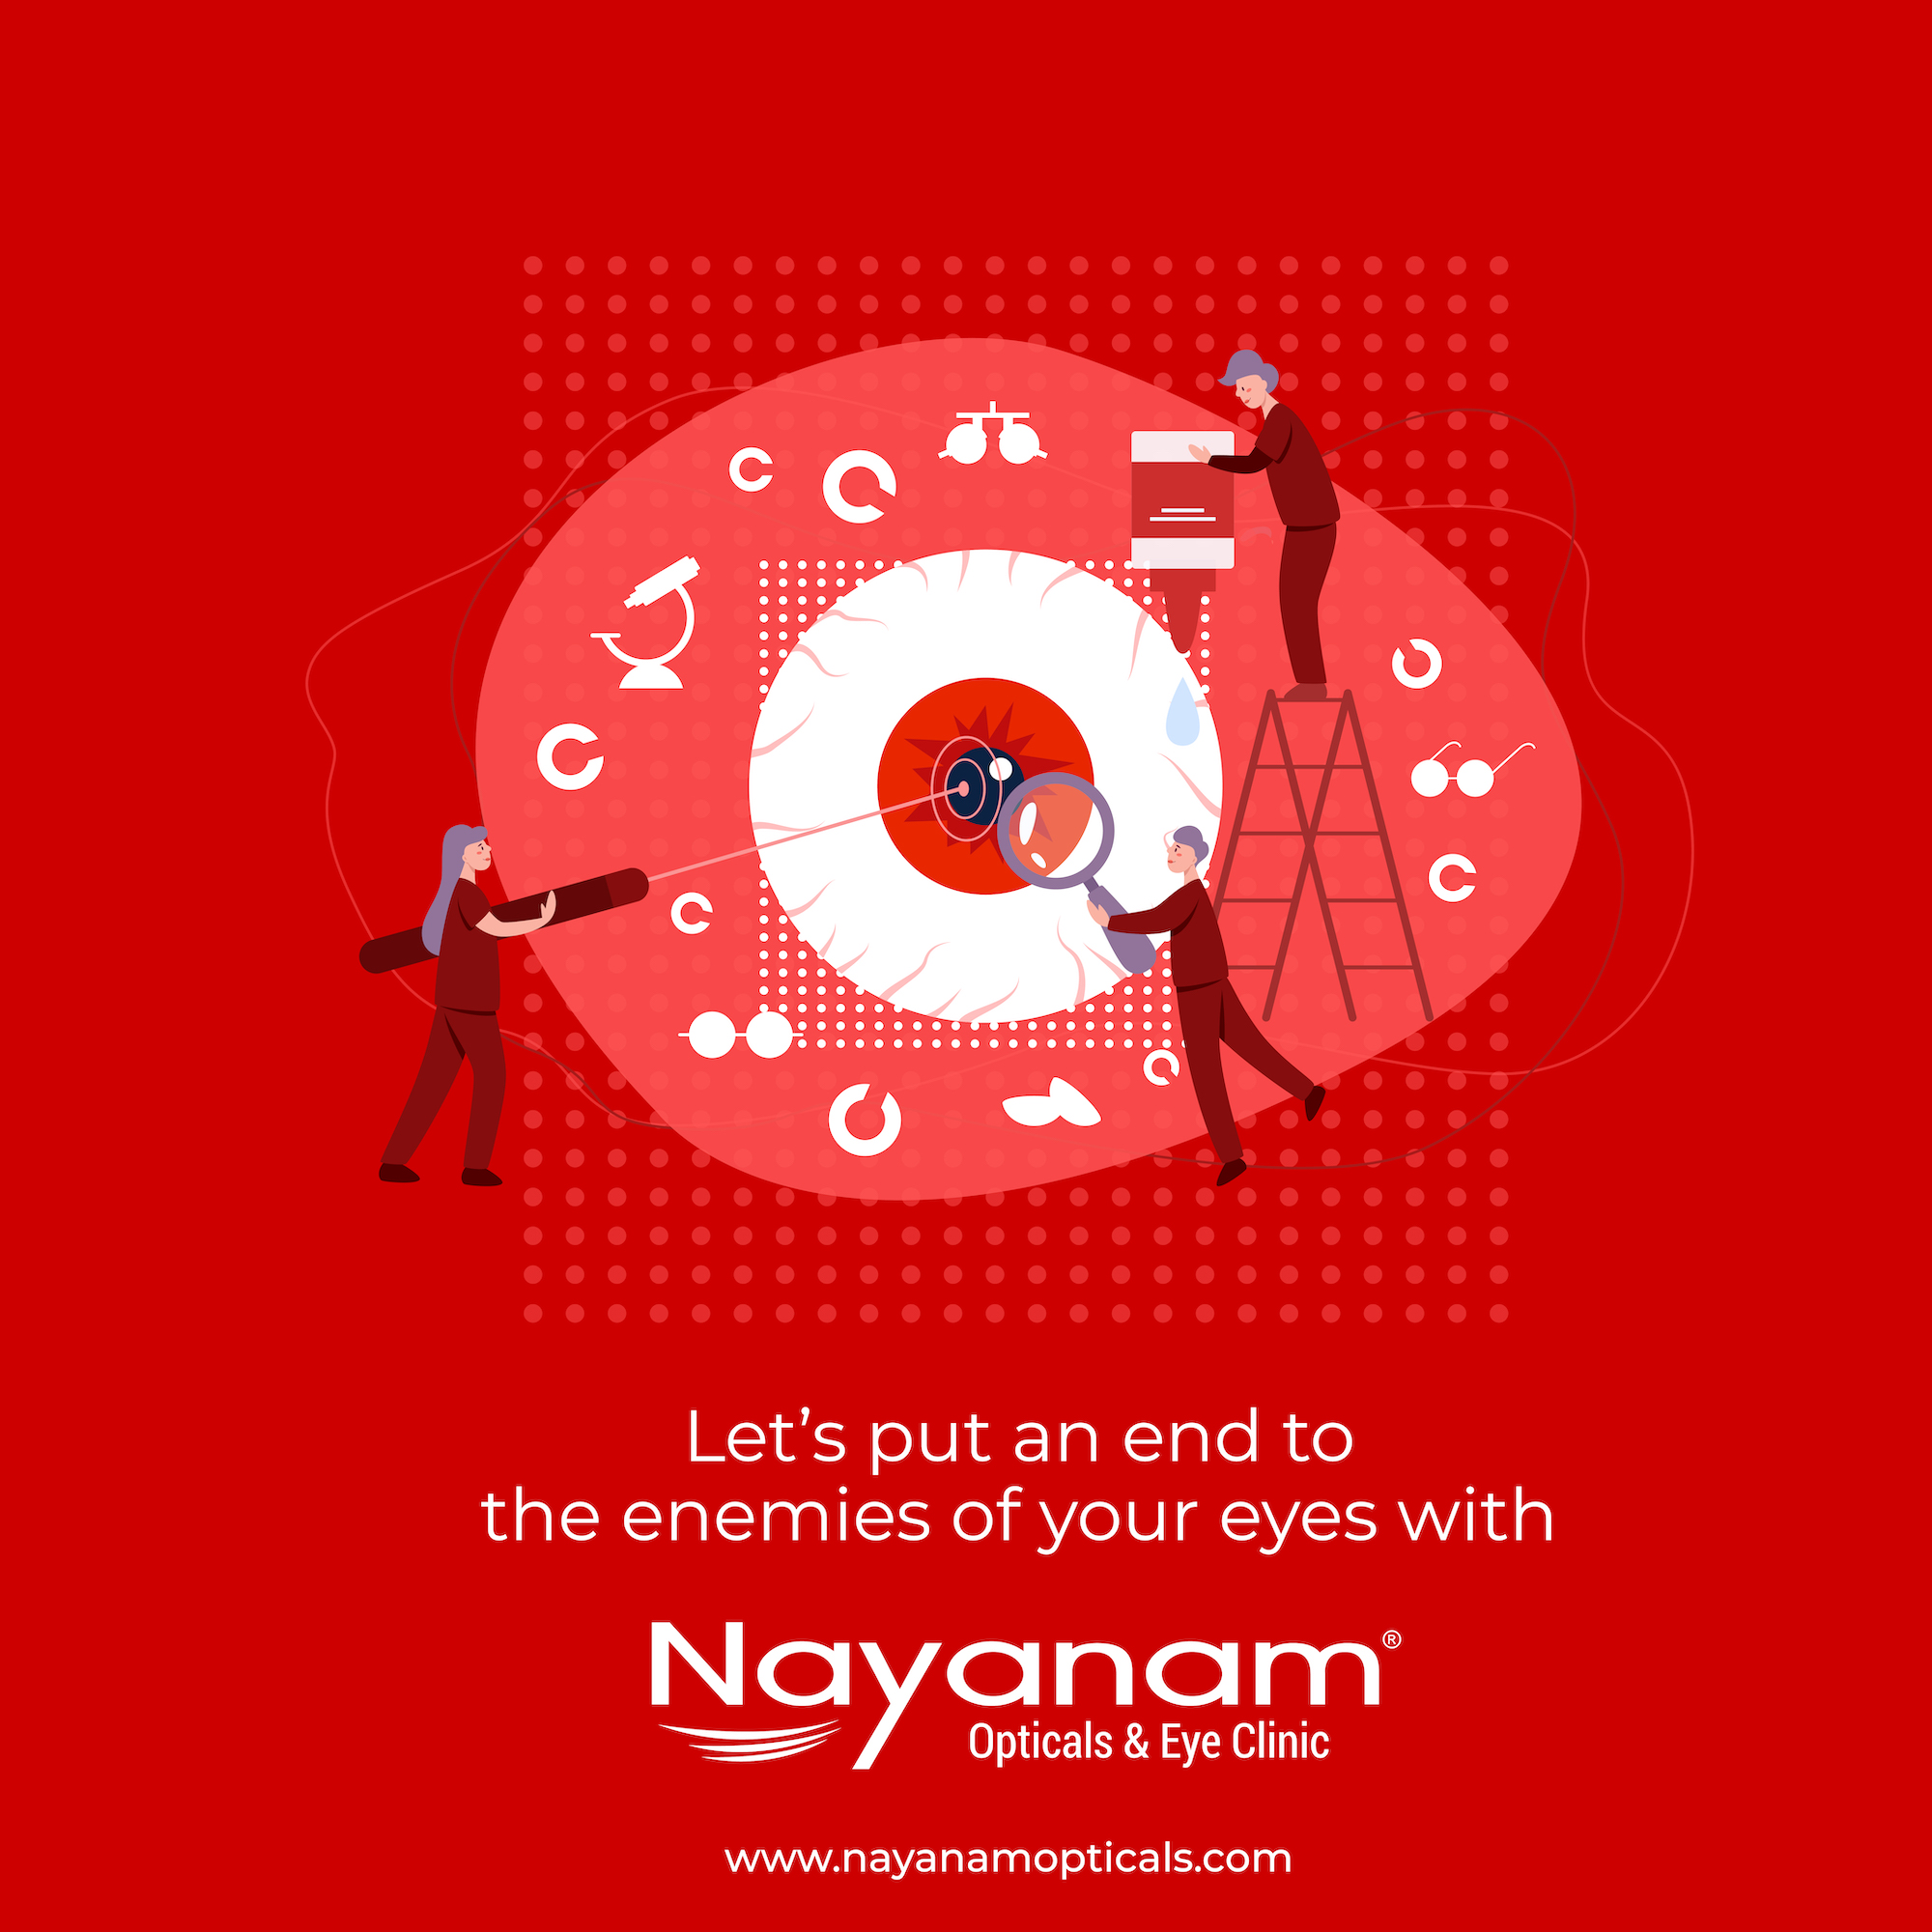 Let's put an end to the enemies of your eyes with Nayanam Opticals & Eye Clinic